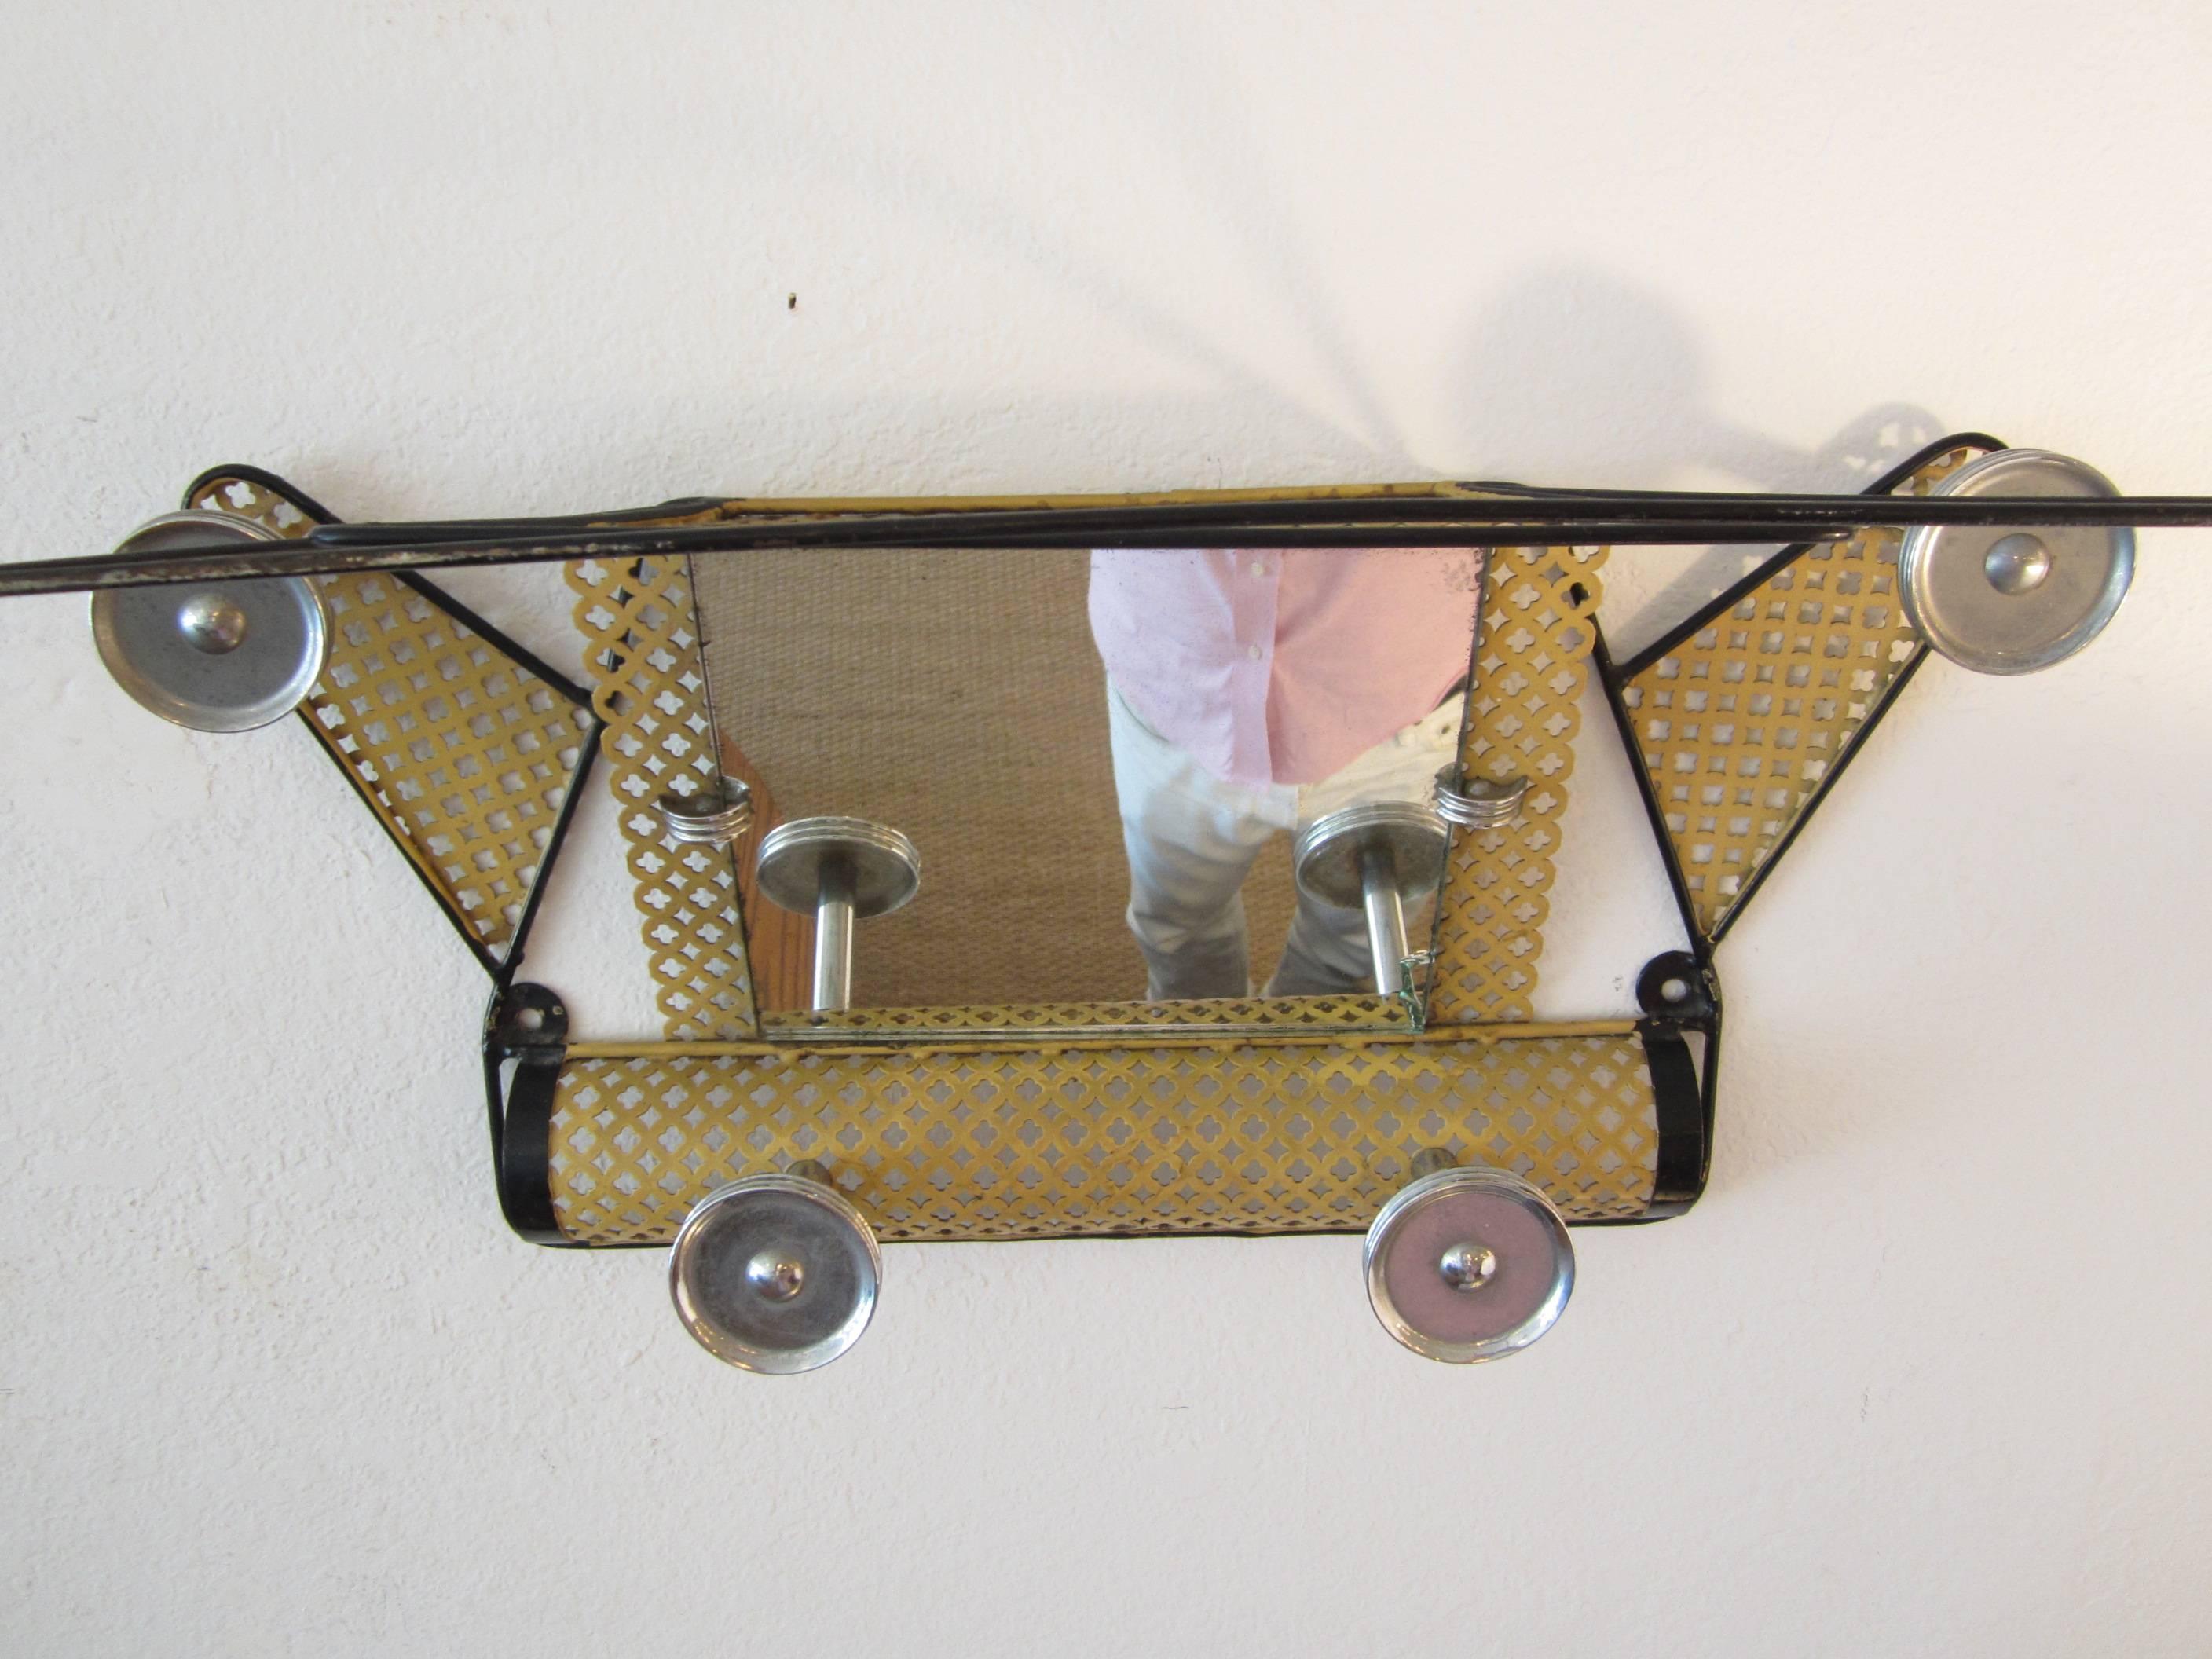 Fantastic pierced metal wall mounted coat rack with top shelf for hats or handbags. Totally original without interrupting its pure state, this coat rack has small rust visible on the bottom but is considered excellent vintage condition. The original